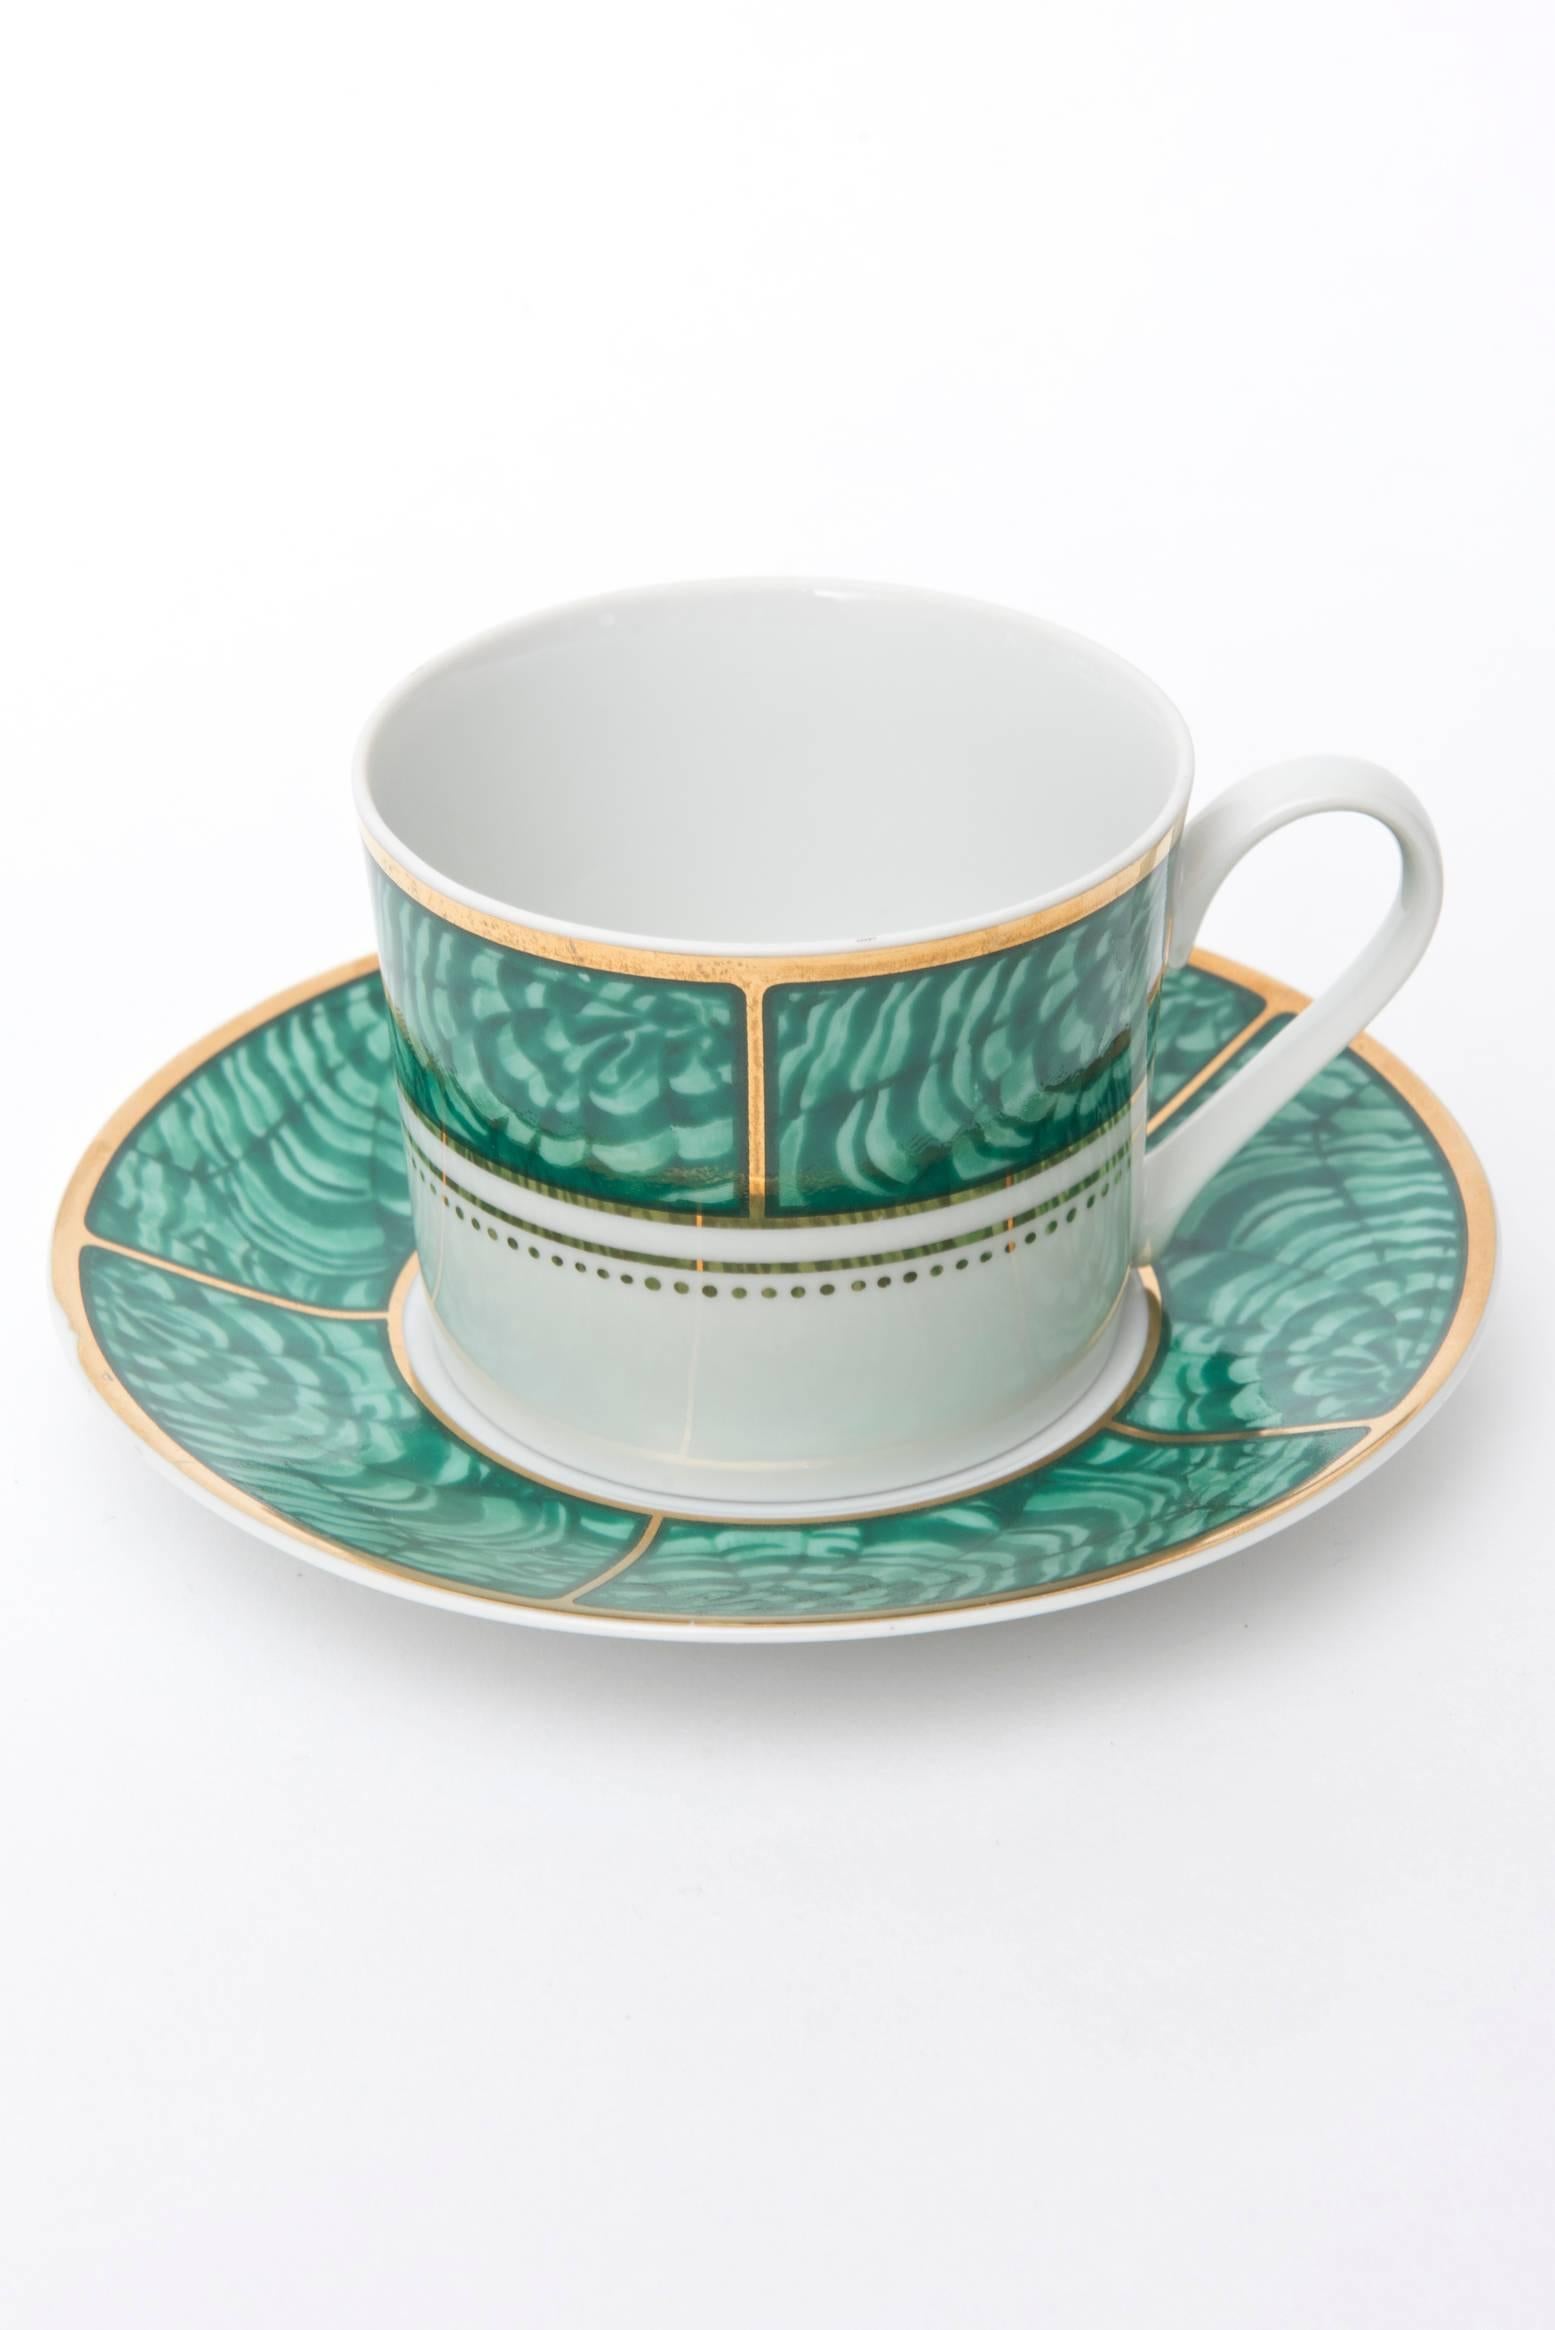 Mid-Century Modern Georges Briard Imperial Malachite Porcelain China Service for Four Vintage